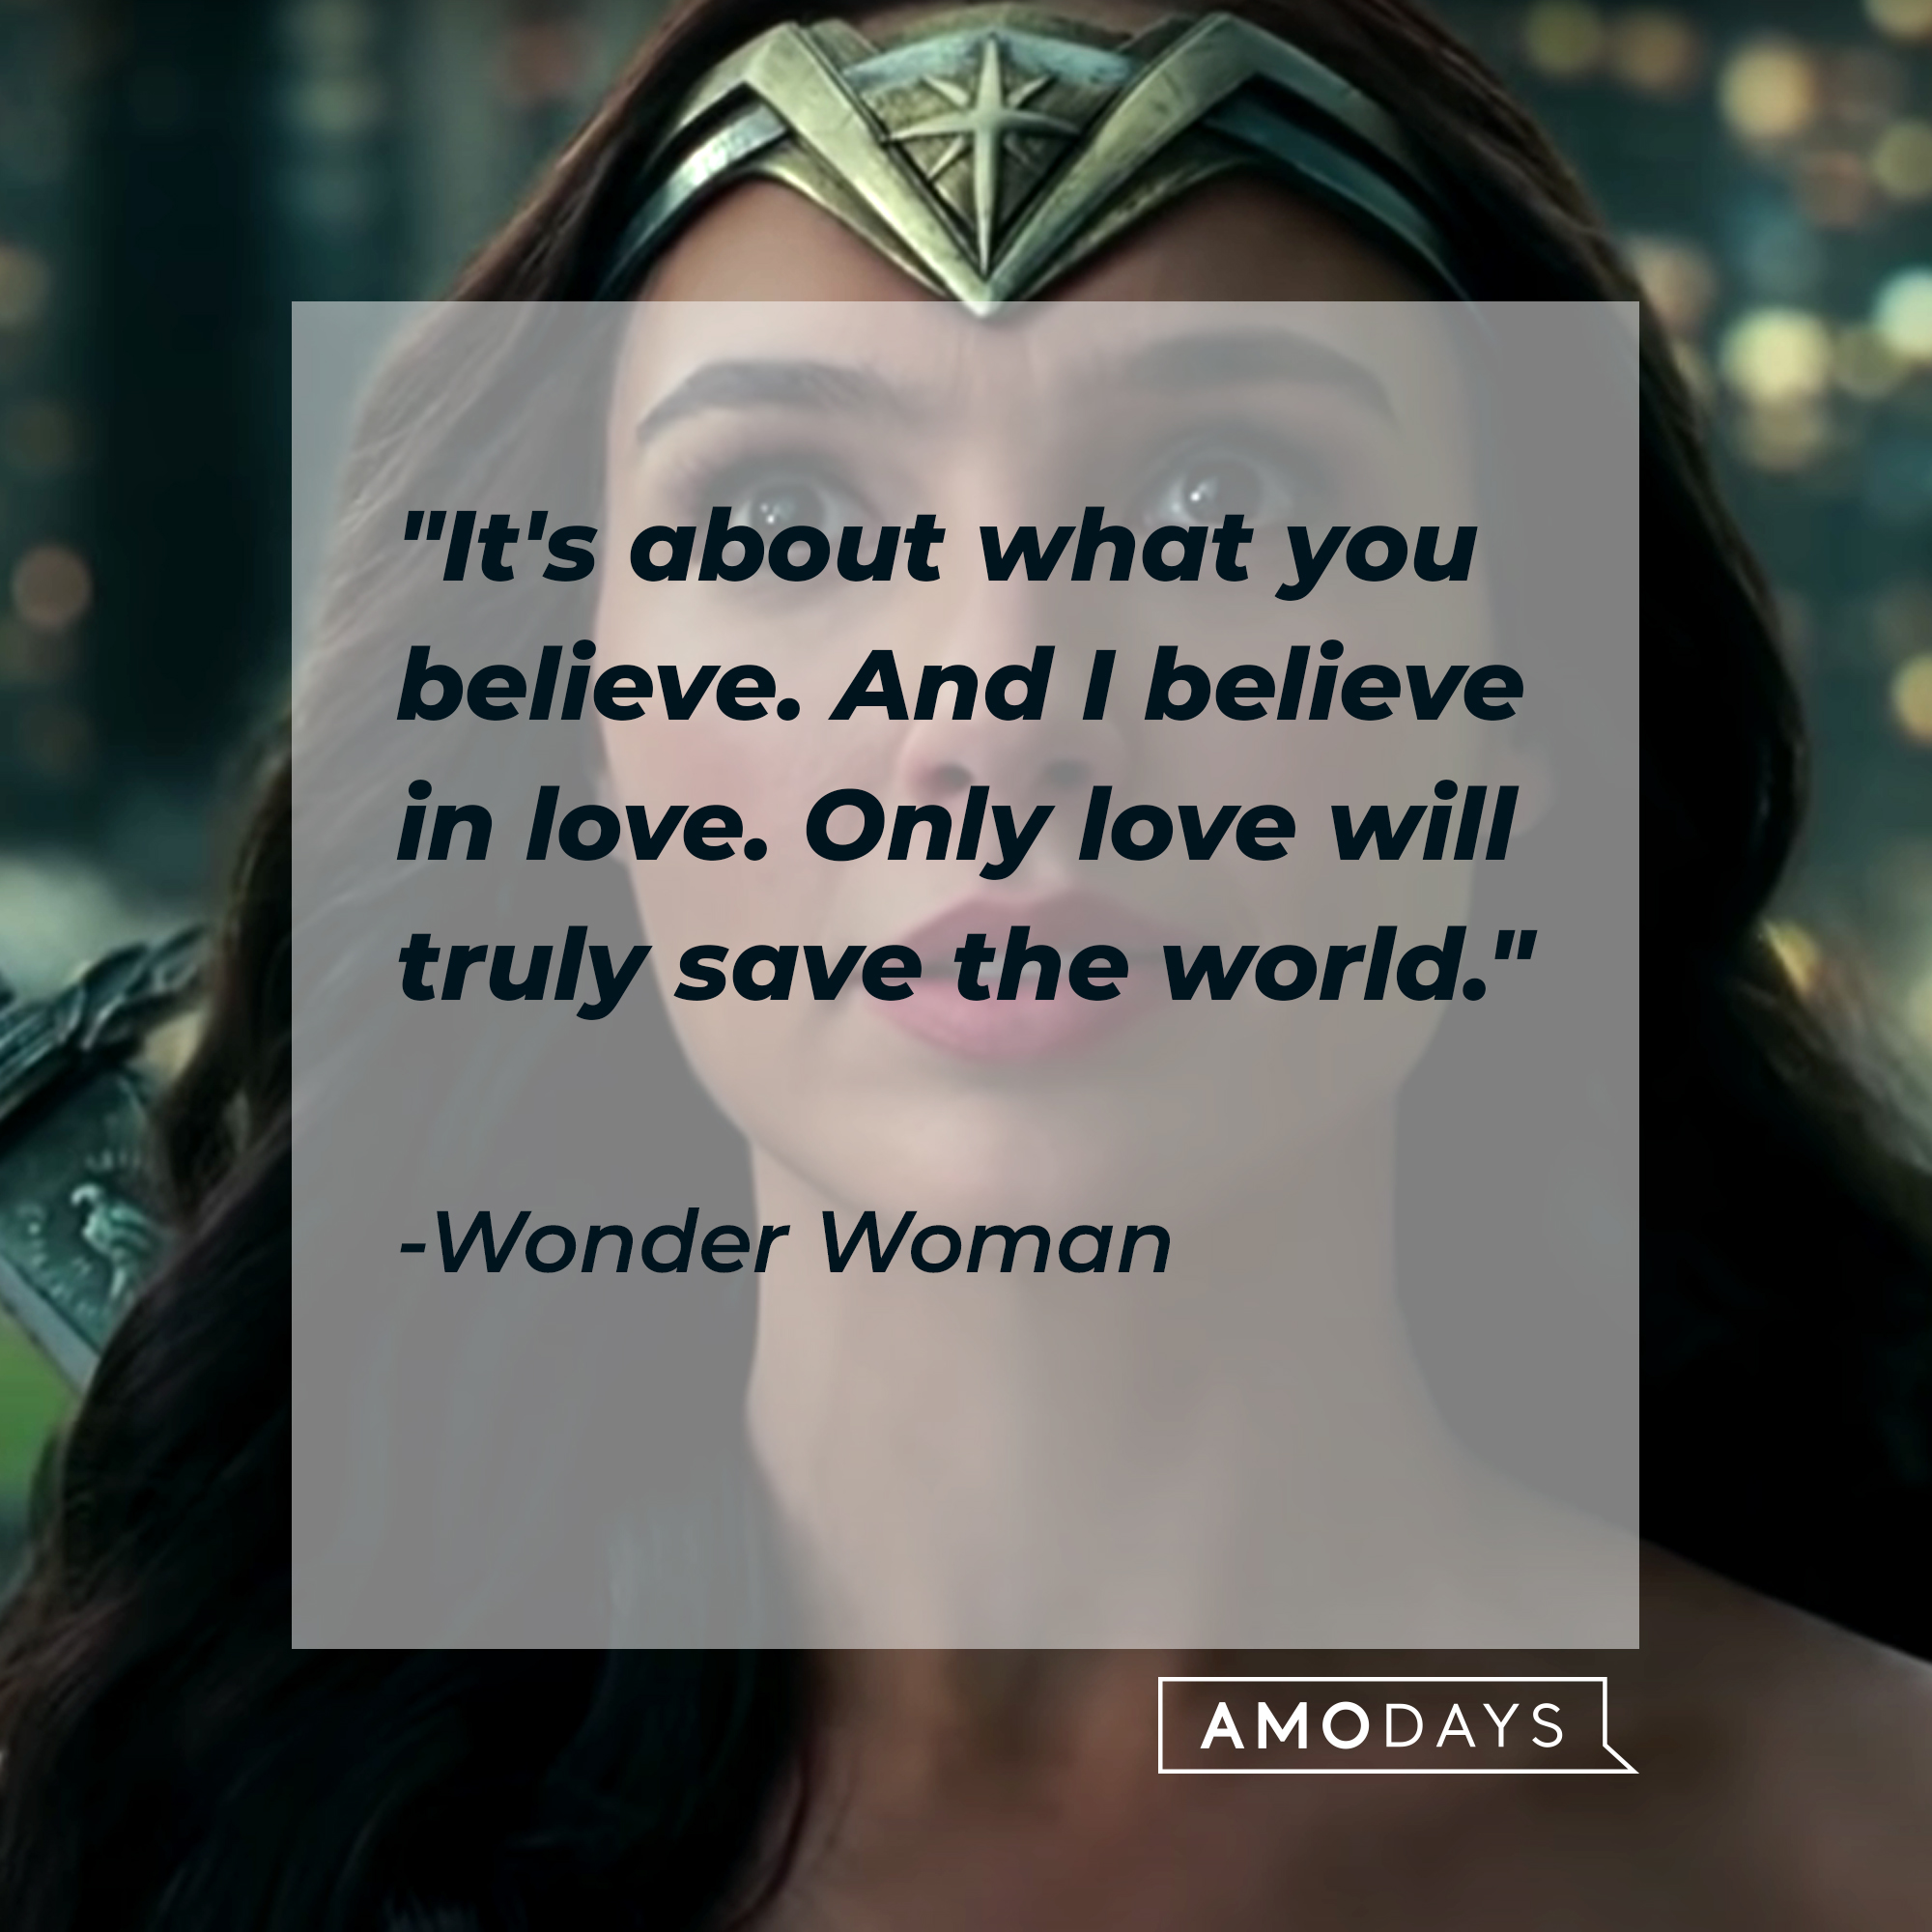 Wonder Woman's quote: "It's about what you believe. And I believe in love. Only love will truly save the world." | Source: facebook.com/dc